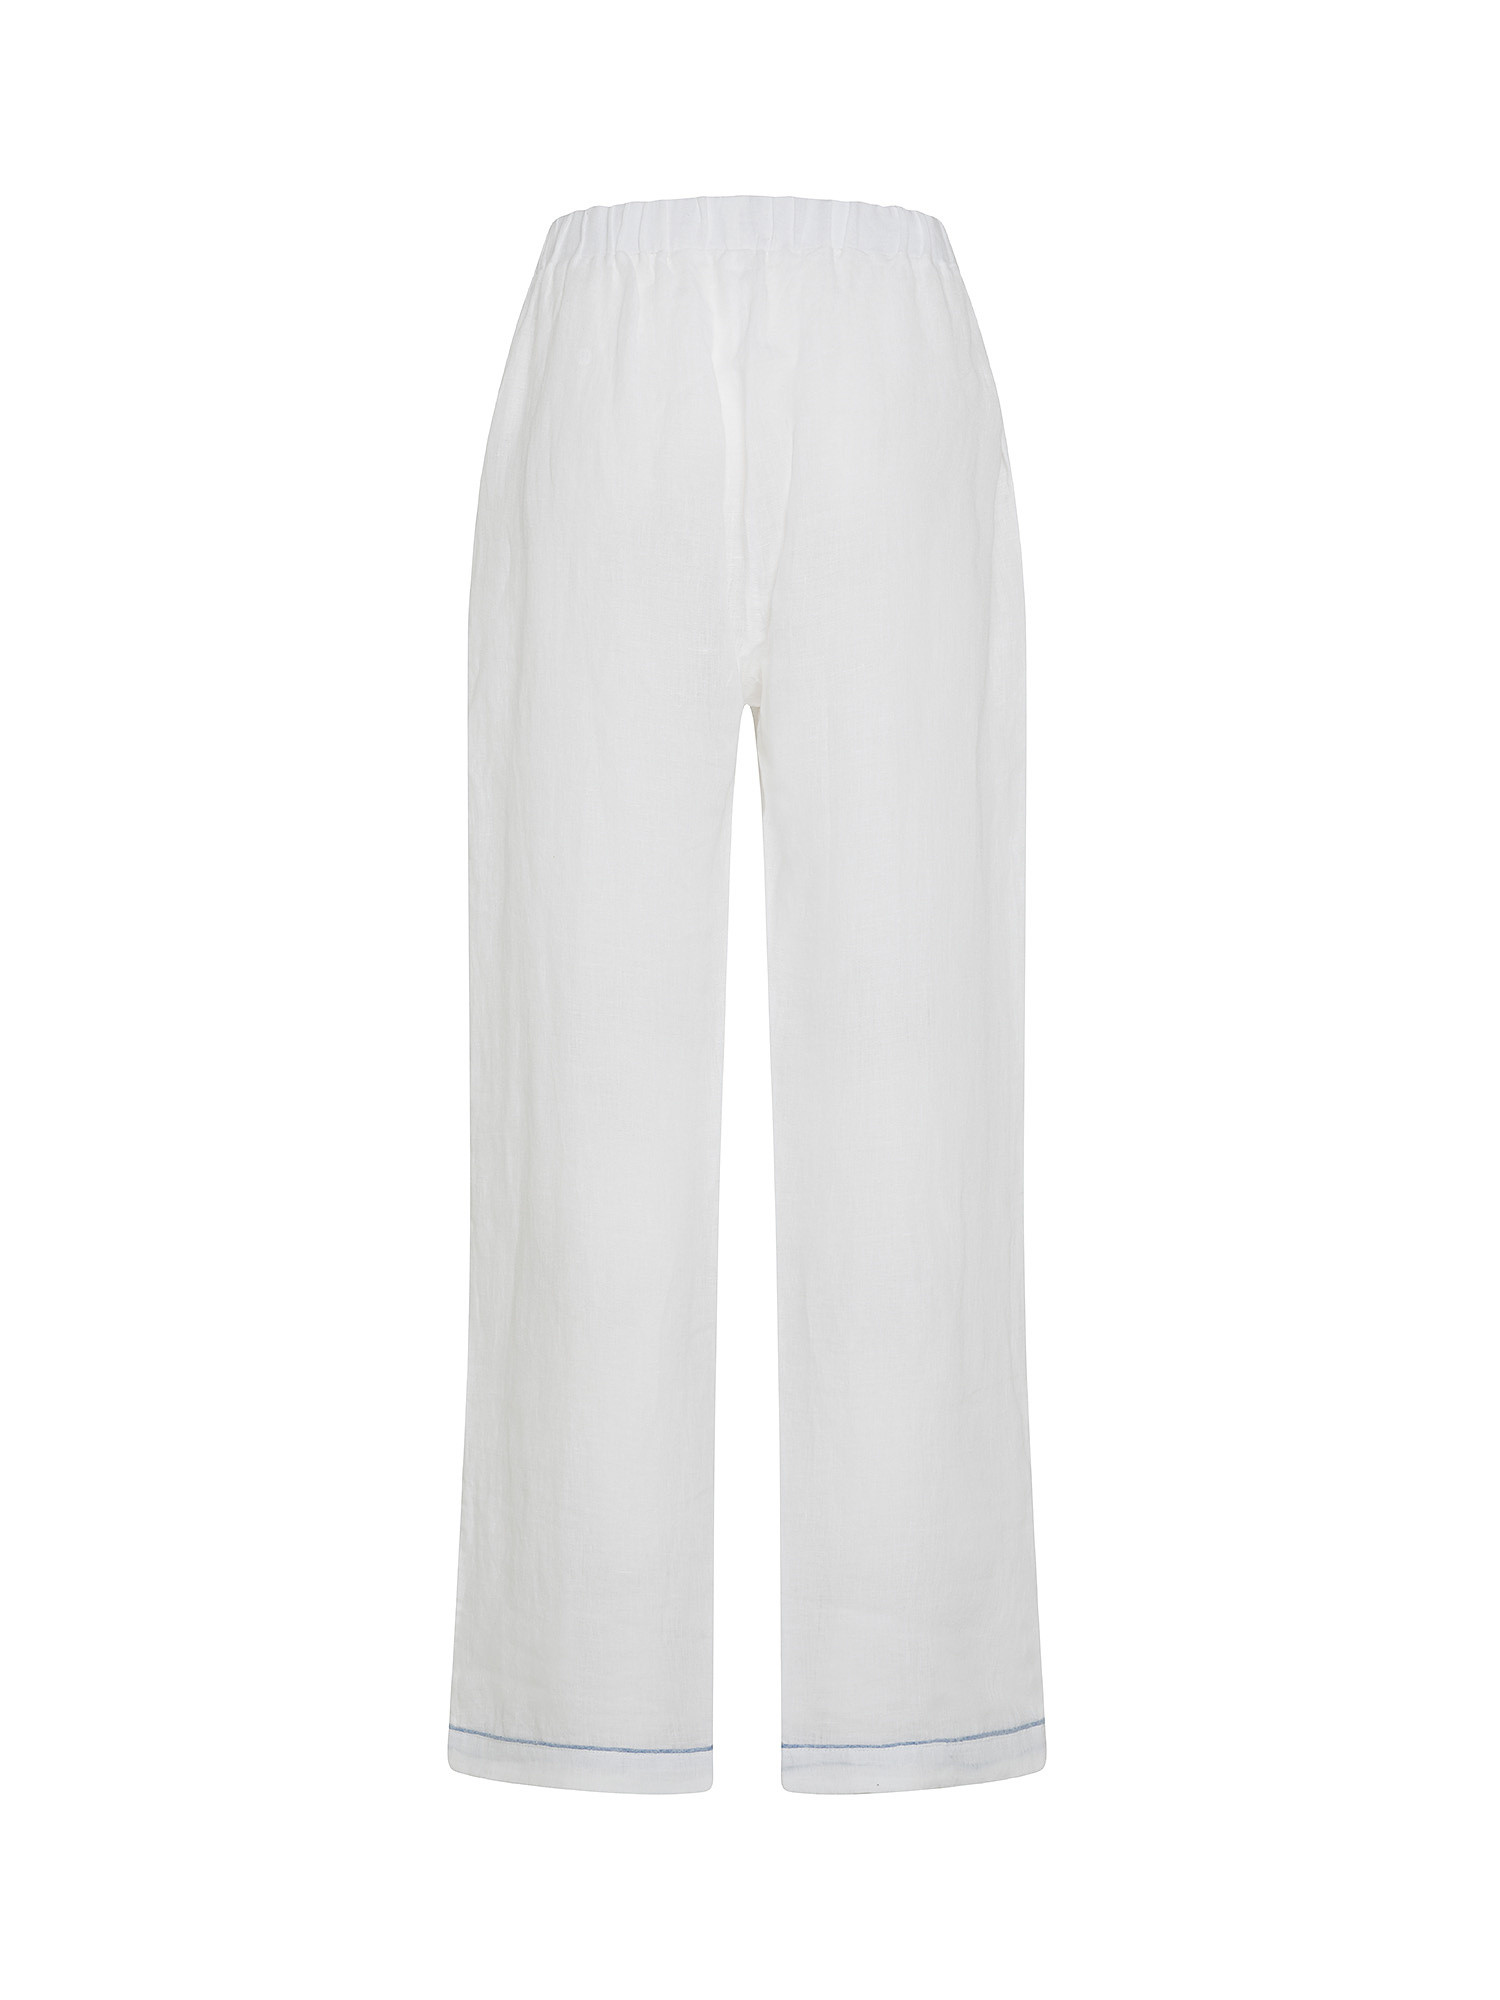 Solid color 100% linen pajama trousers, White, large image number 1